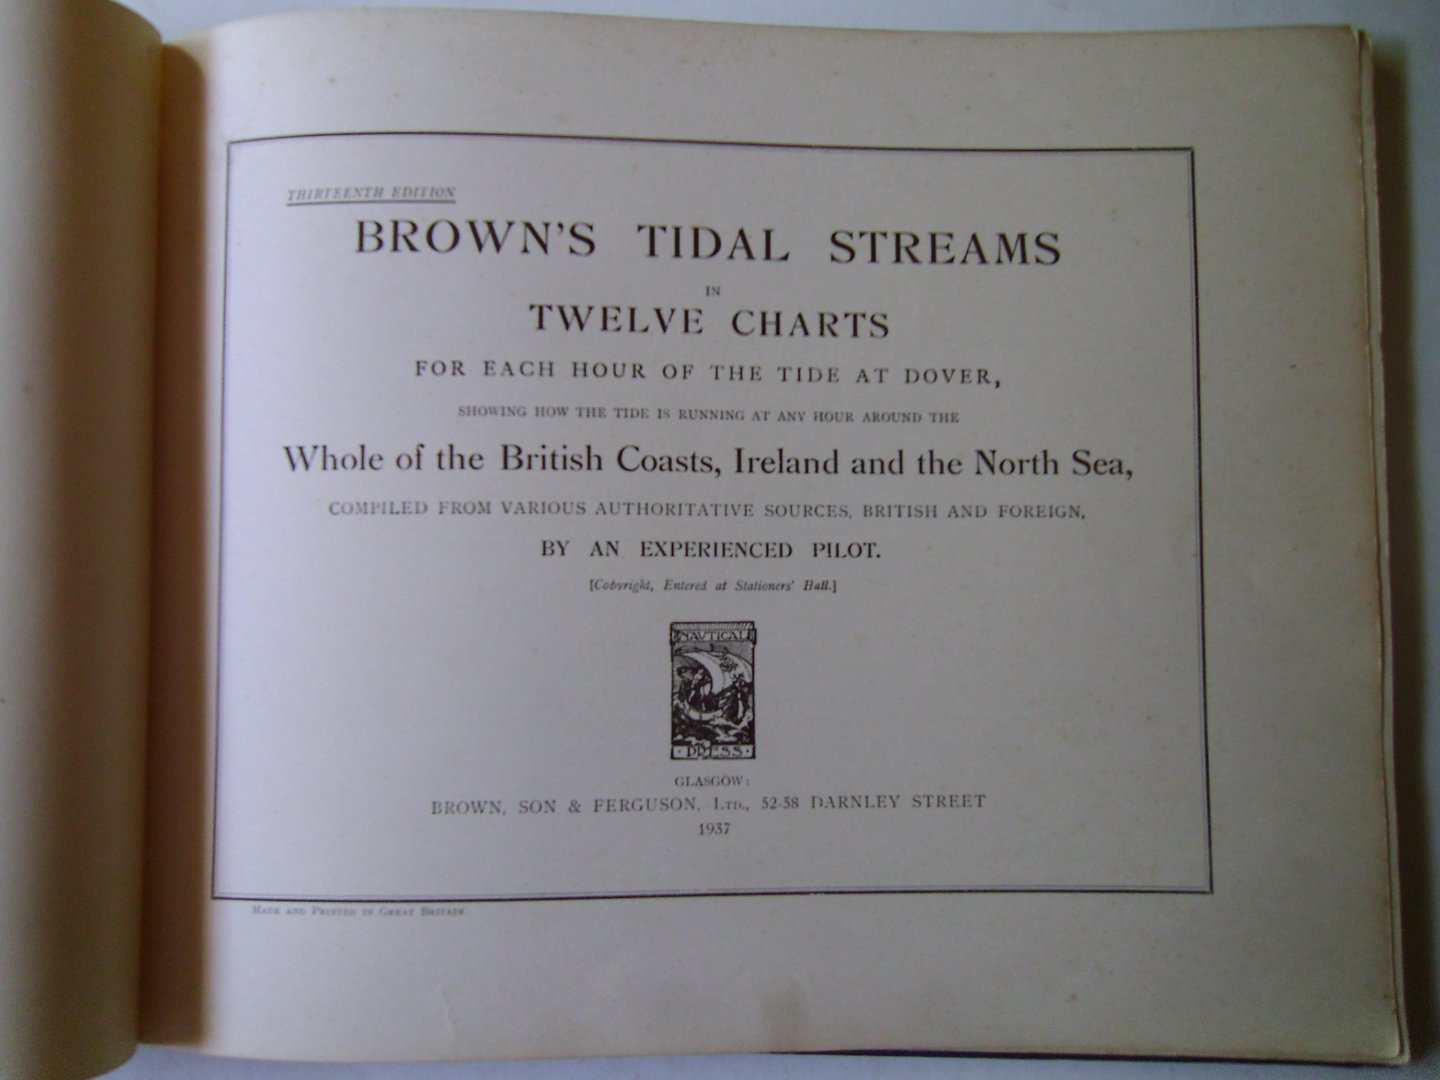 brown - Brown's tidal streams in twelve charts for each hour of the tide at Dover : showing how the tide is running at any hour around the whole of the British Coasts, Ireland and the North Sea